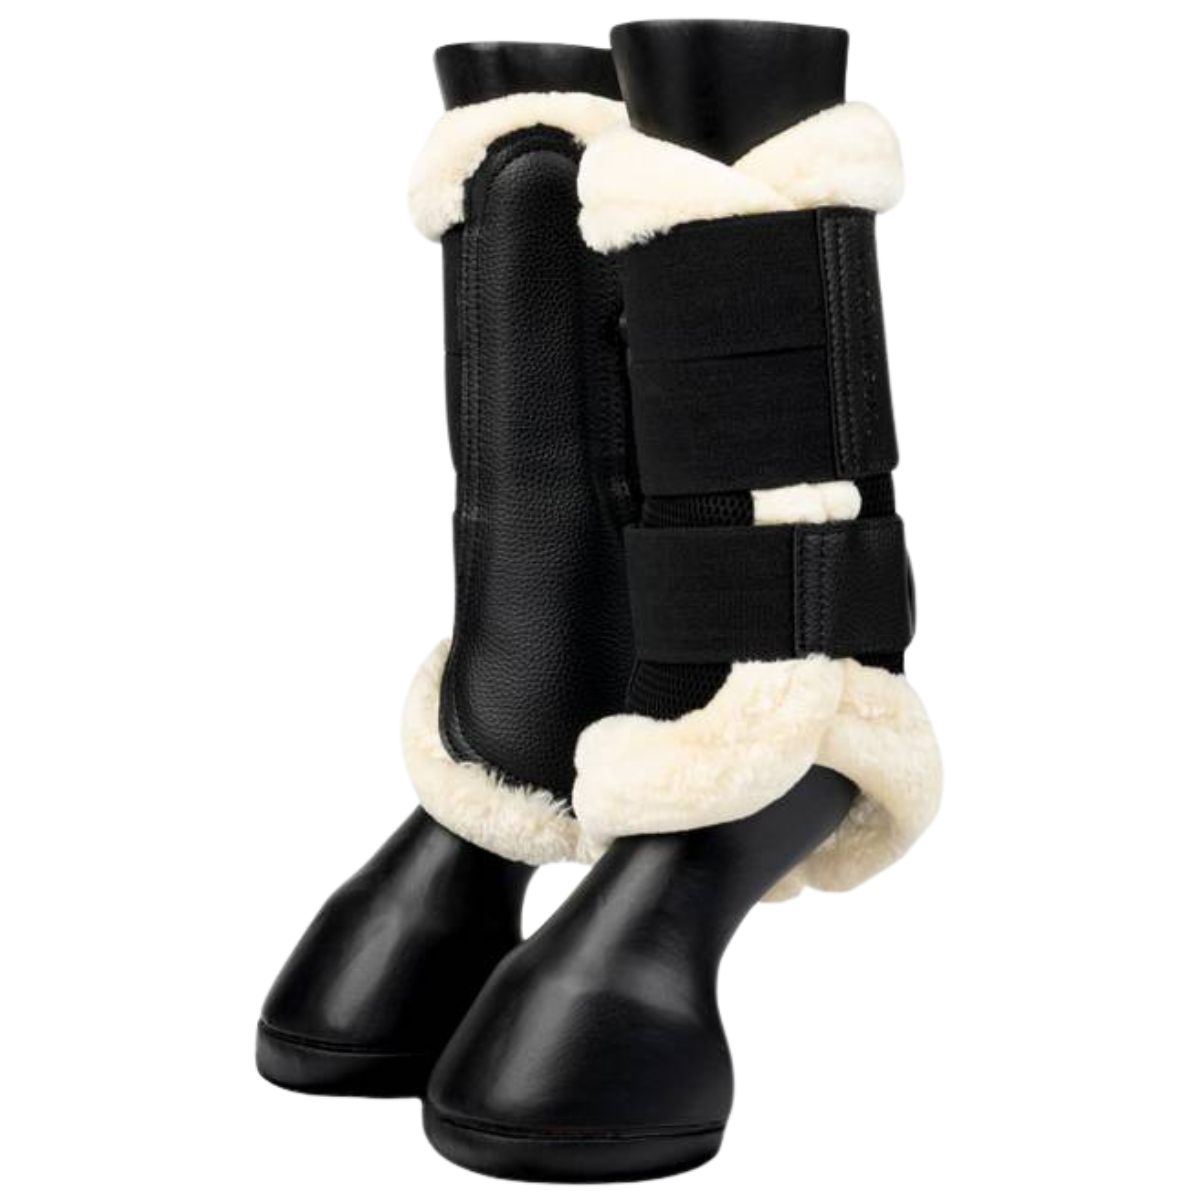 LeMieux Fleece Edged Brushing Boots in Black/Natural 